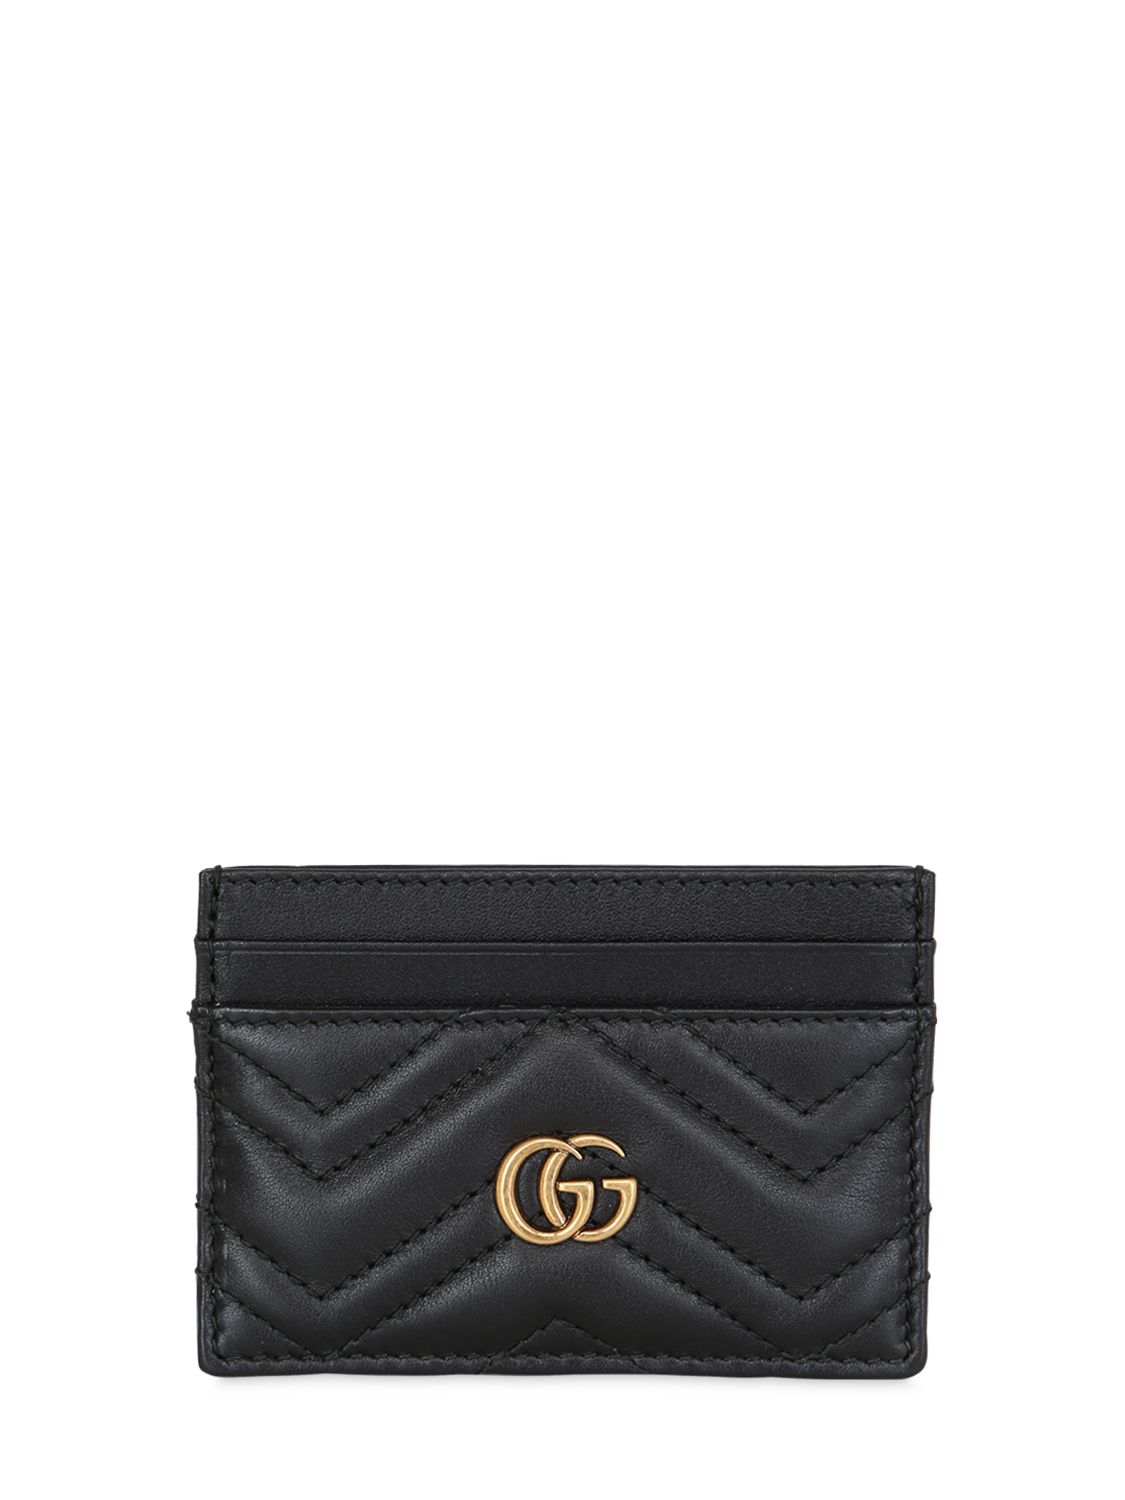 Gg Marmont Quilted Leather Card Holder - GUCCI - Modalova